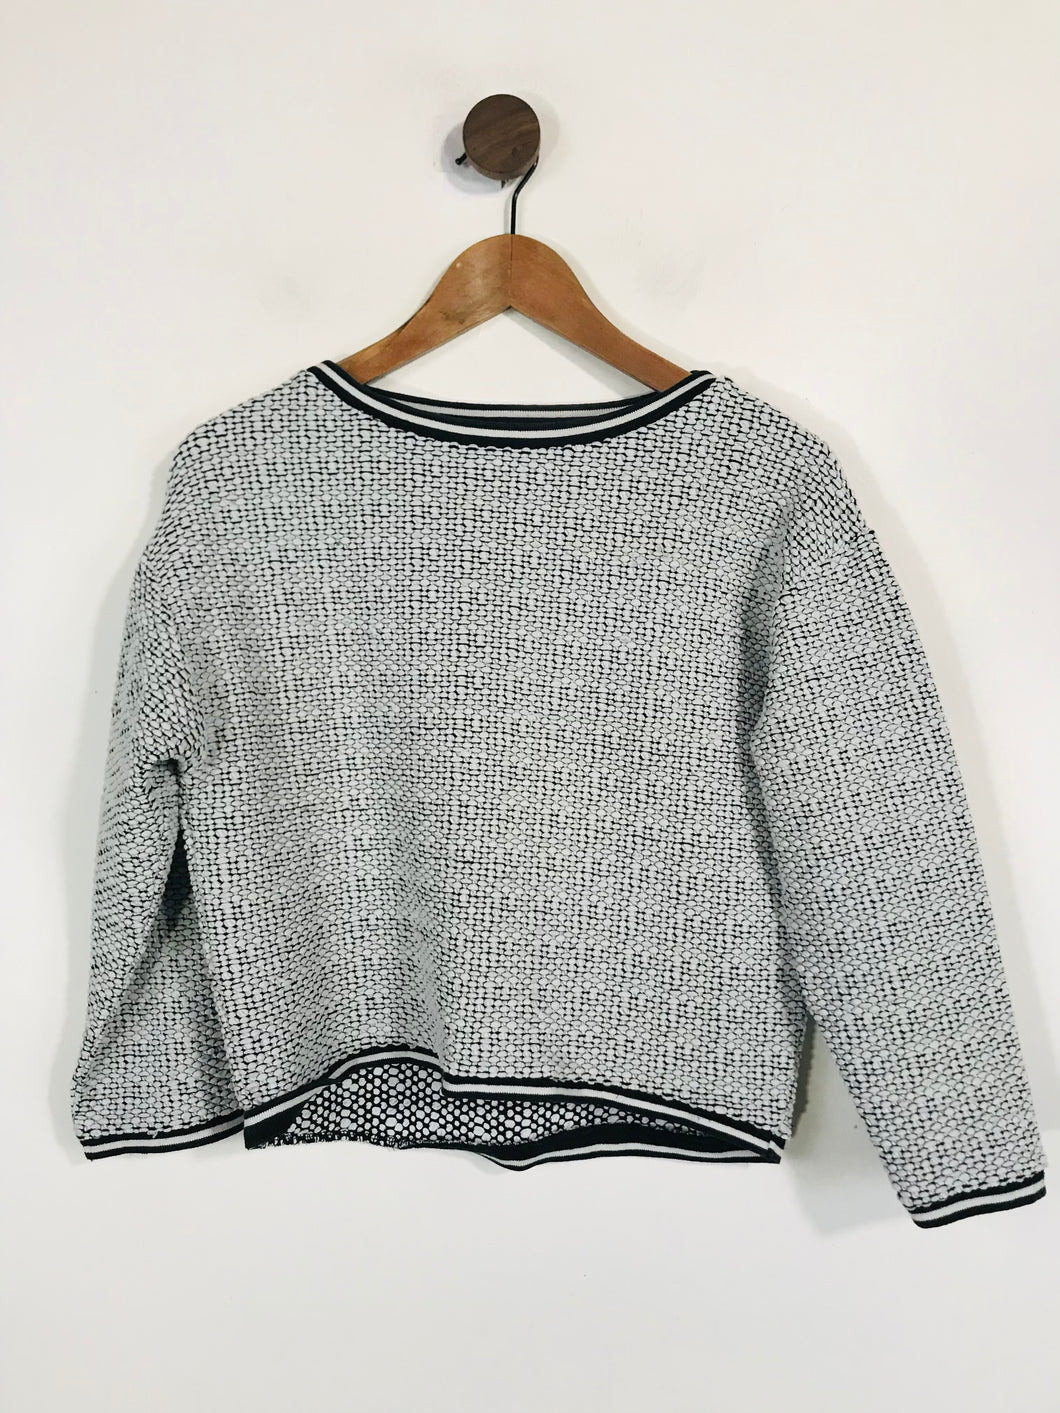 French Connection Women's Jumper | XS UK6-8 | White